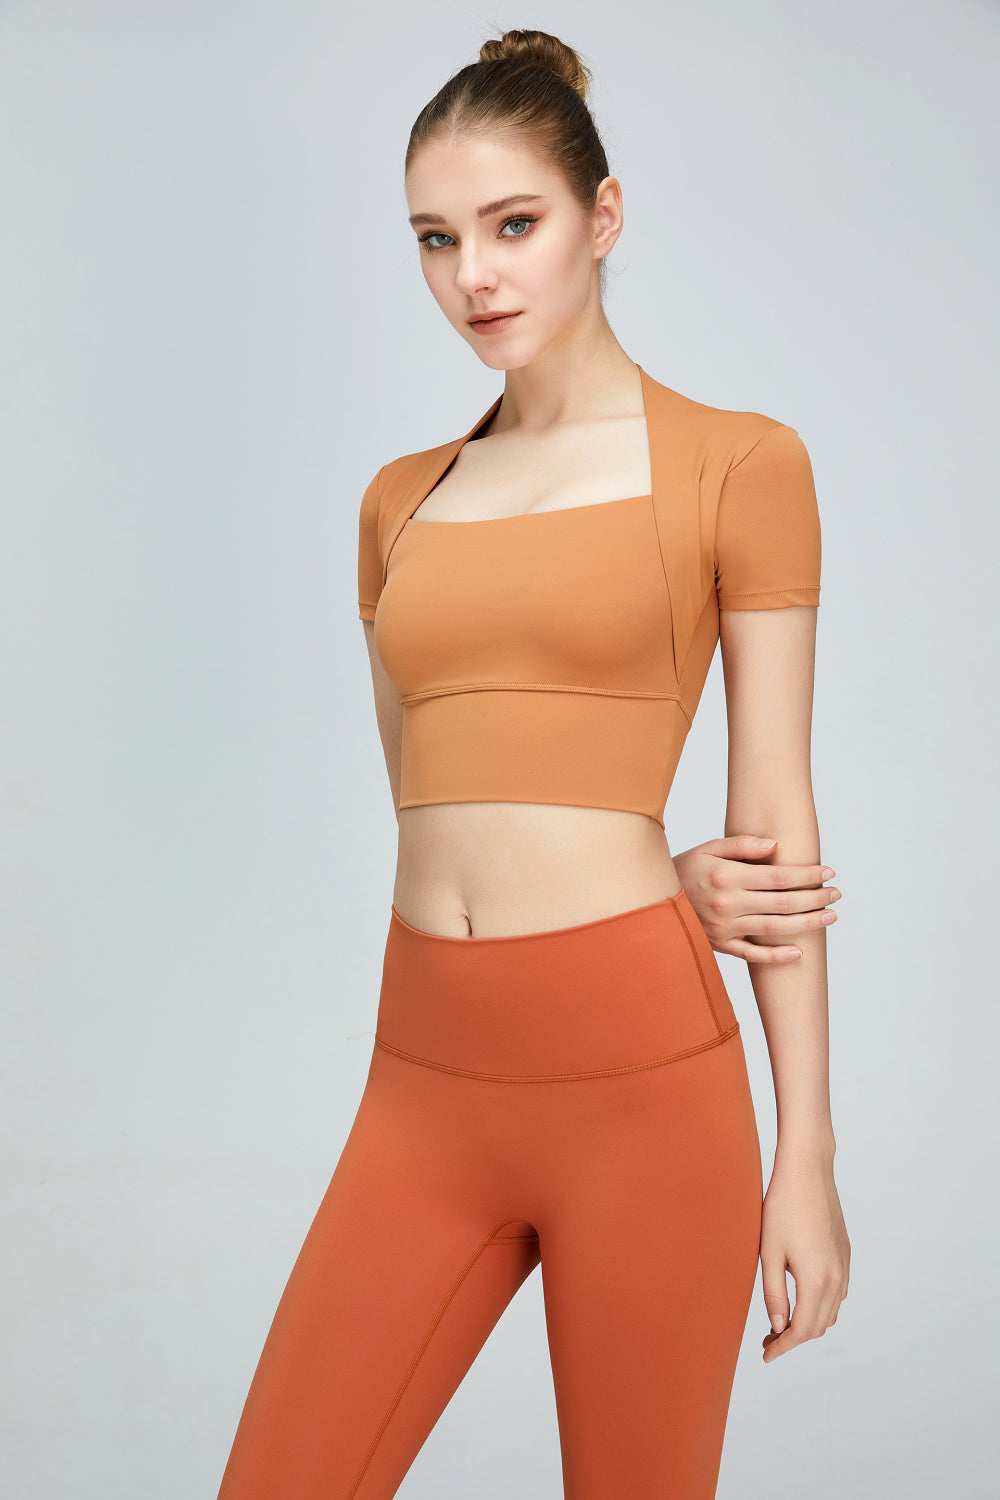 Short Sleeve Cropped Sports Top - 5 colors - women's crop top at TFC&H Co.